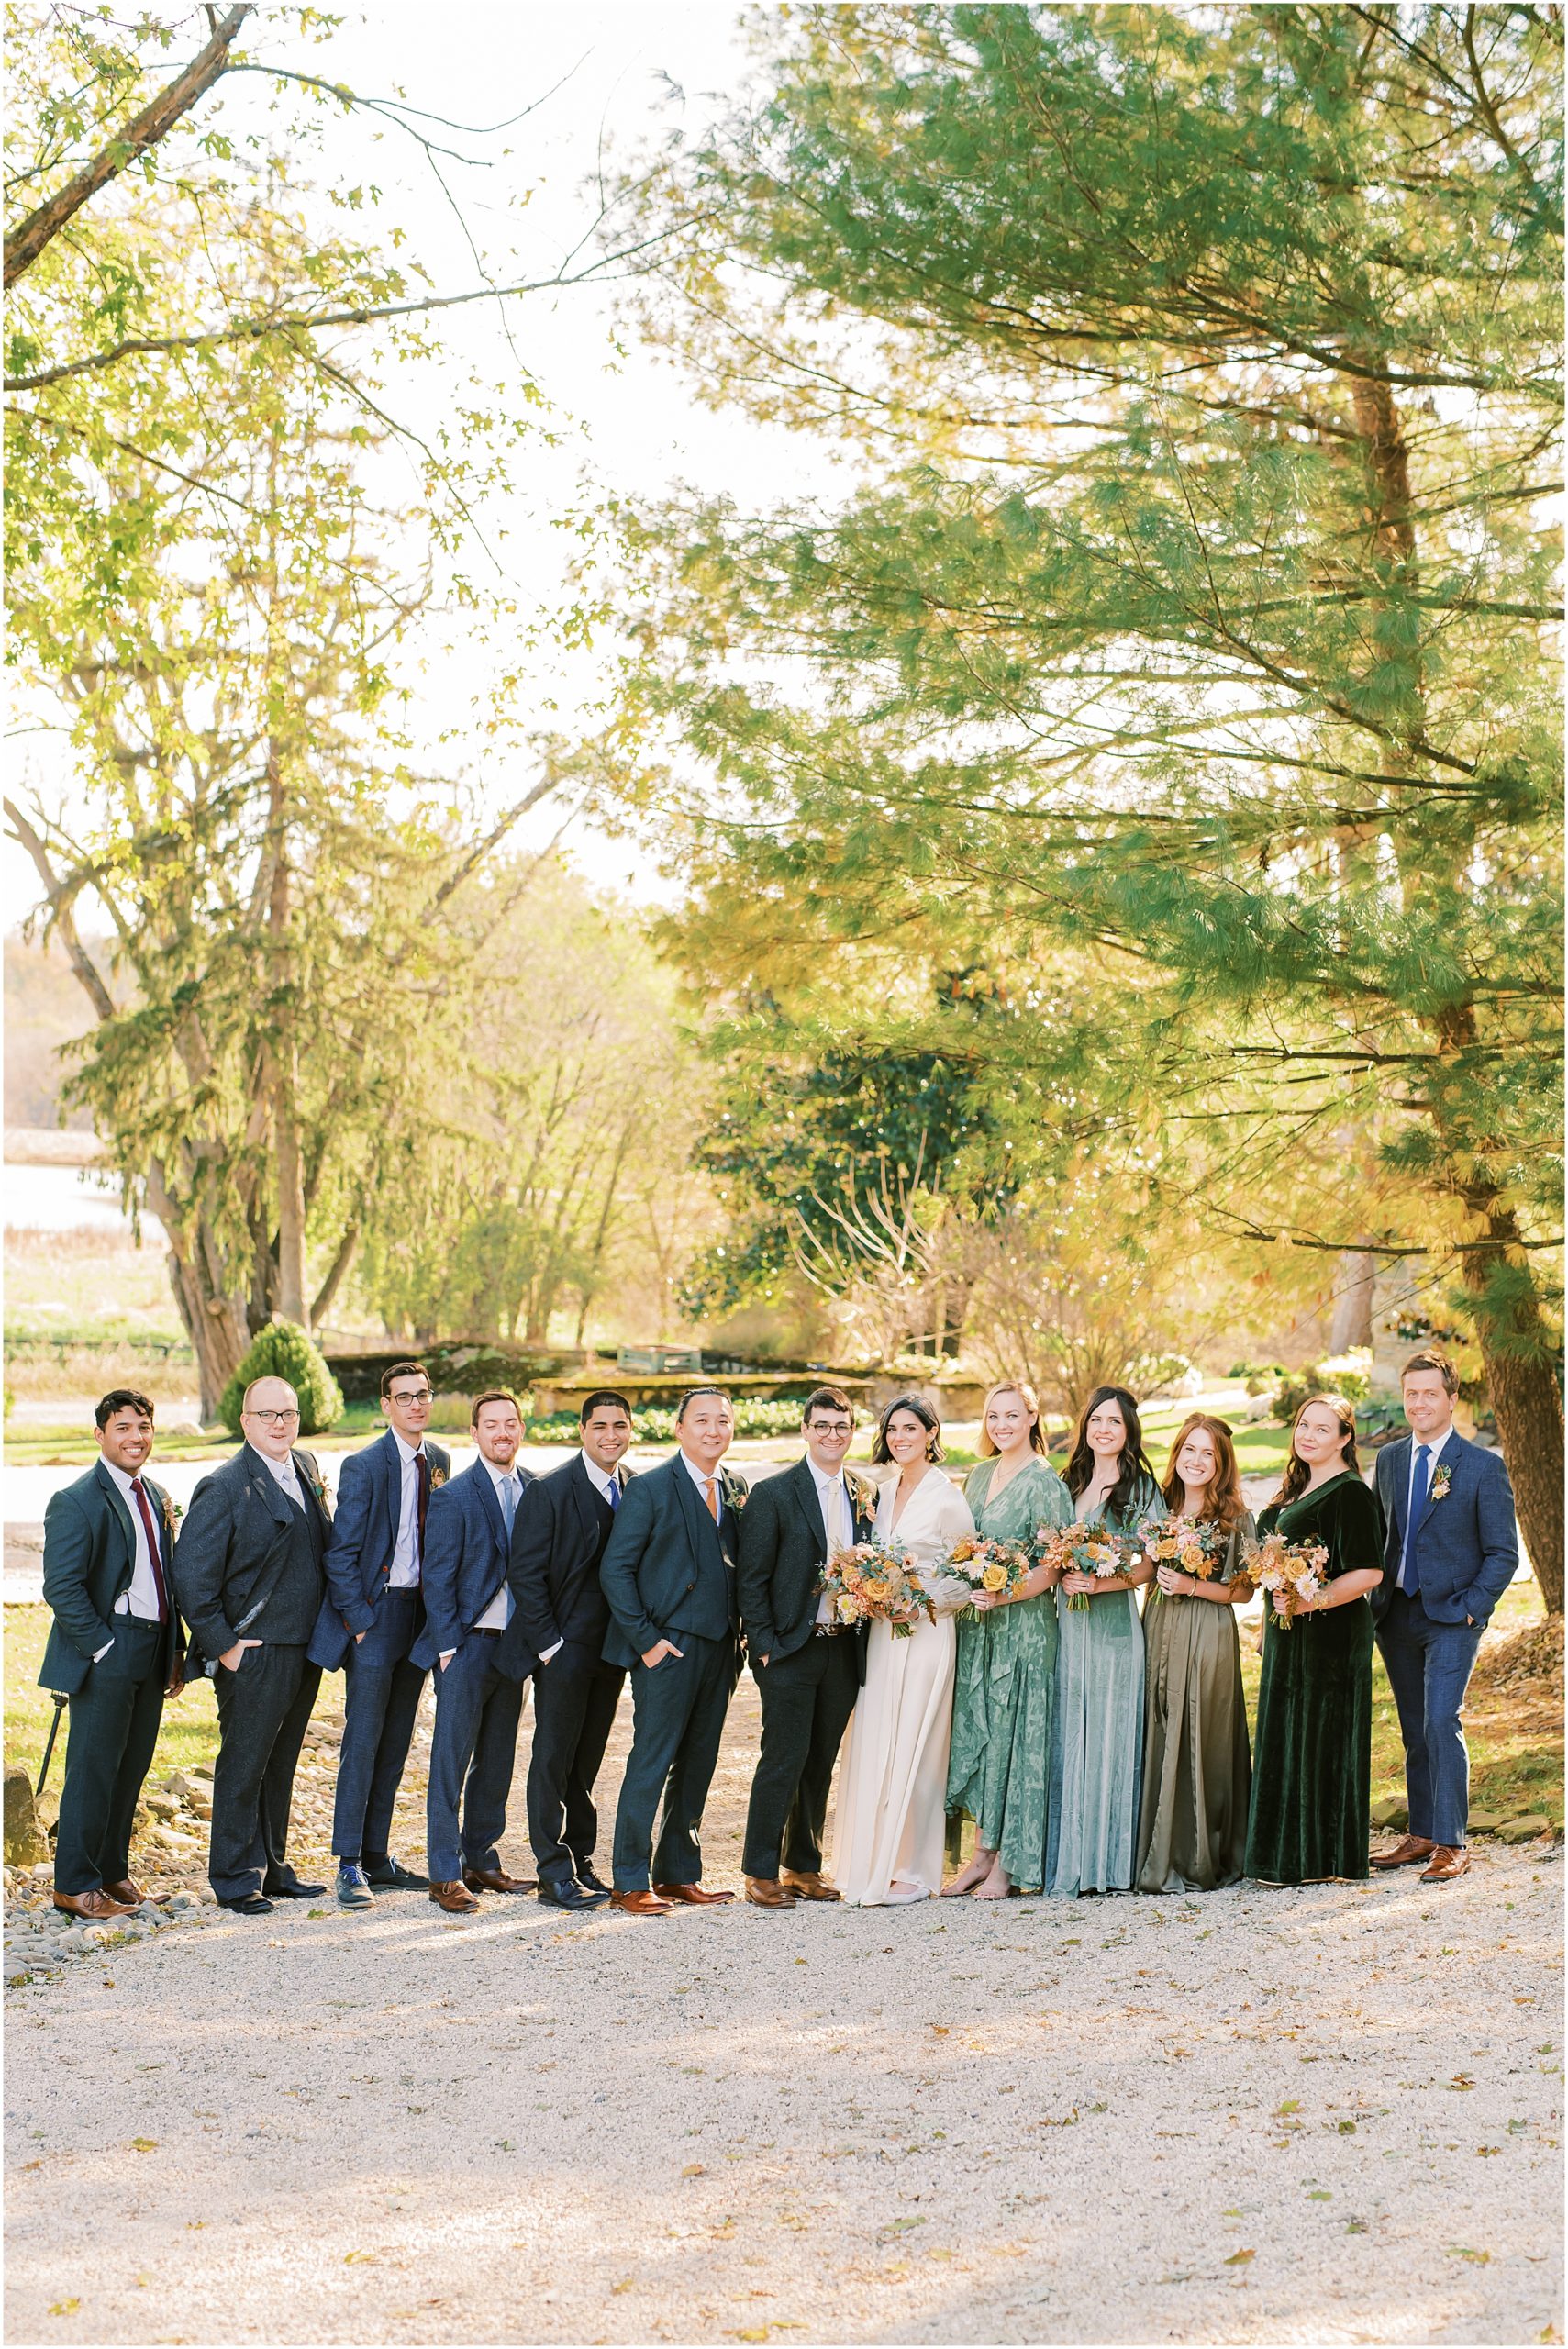 Wedding party at Tranquility Farm